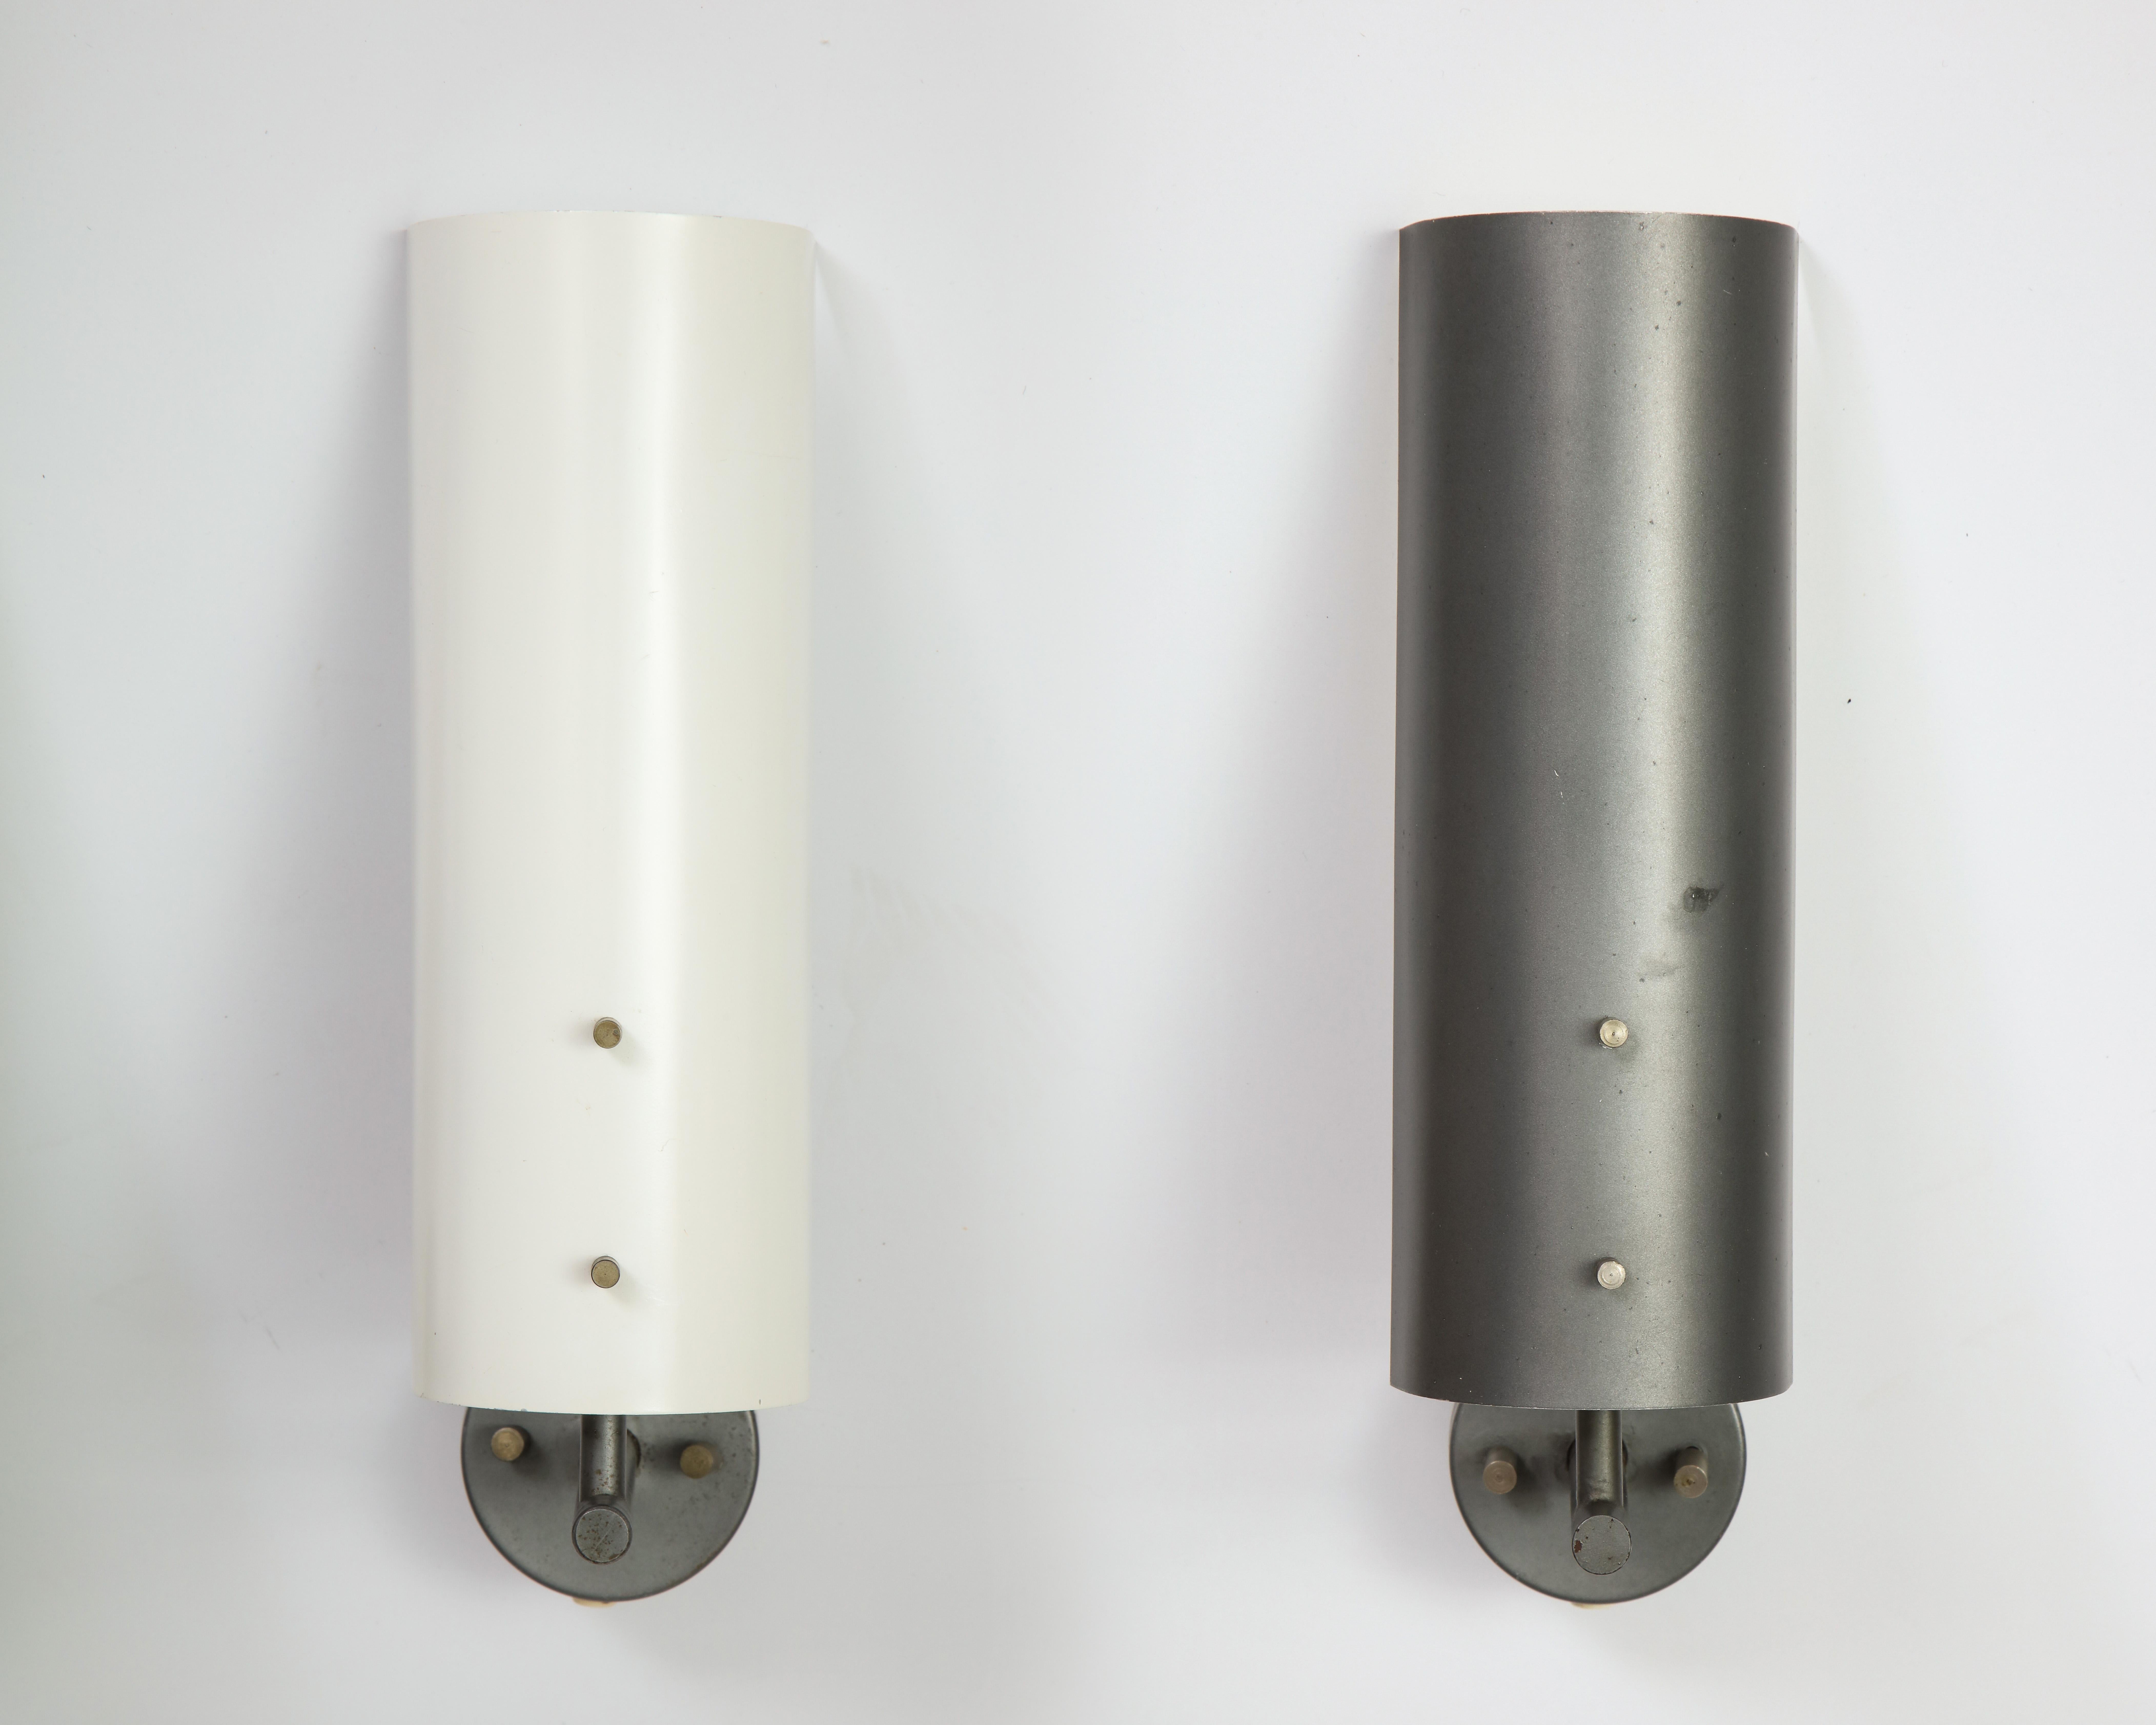 A pair of cold-painted aluminum wall lamps model 7082 designed by J. J. M. Hoogervorst for Anvia Almelo, Holland 1955. These sconces have a grey painted arm; one each of white and dark grey shade. The shade can rotate for a different light beam. The